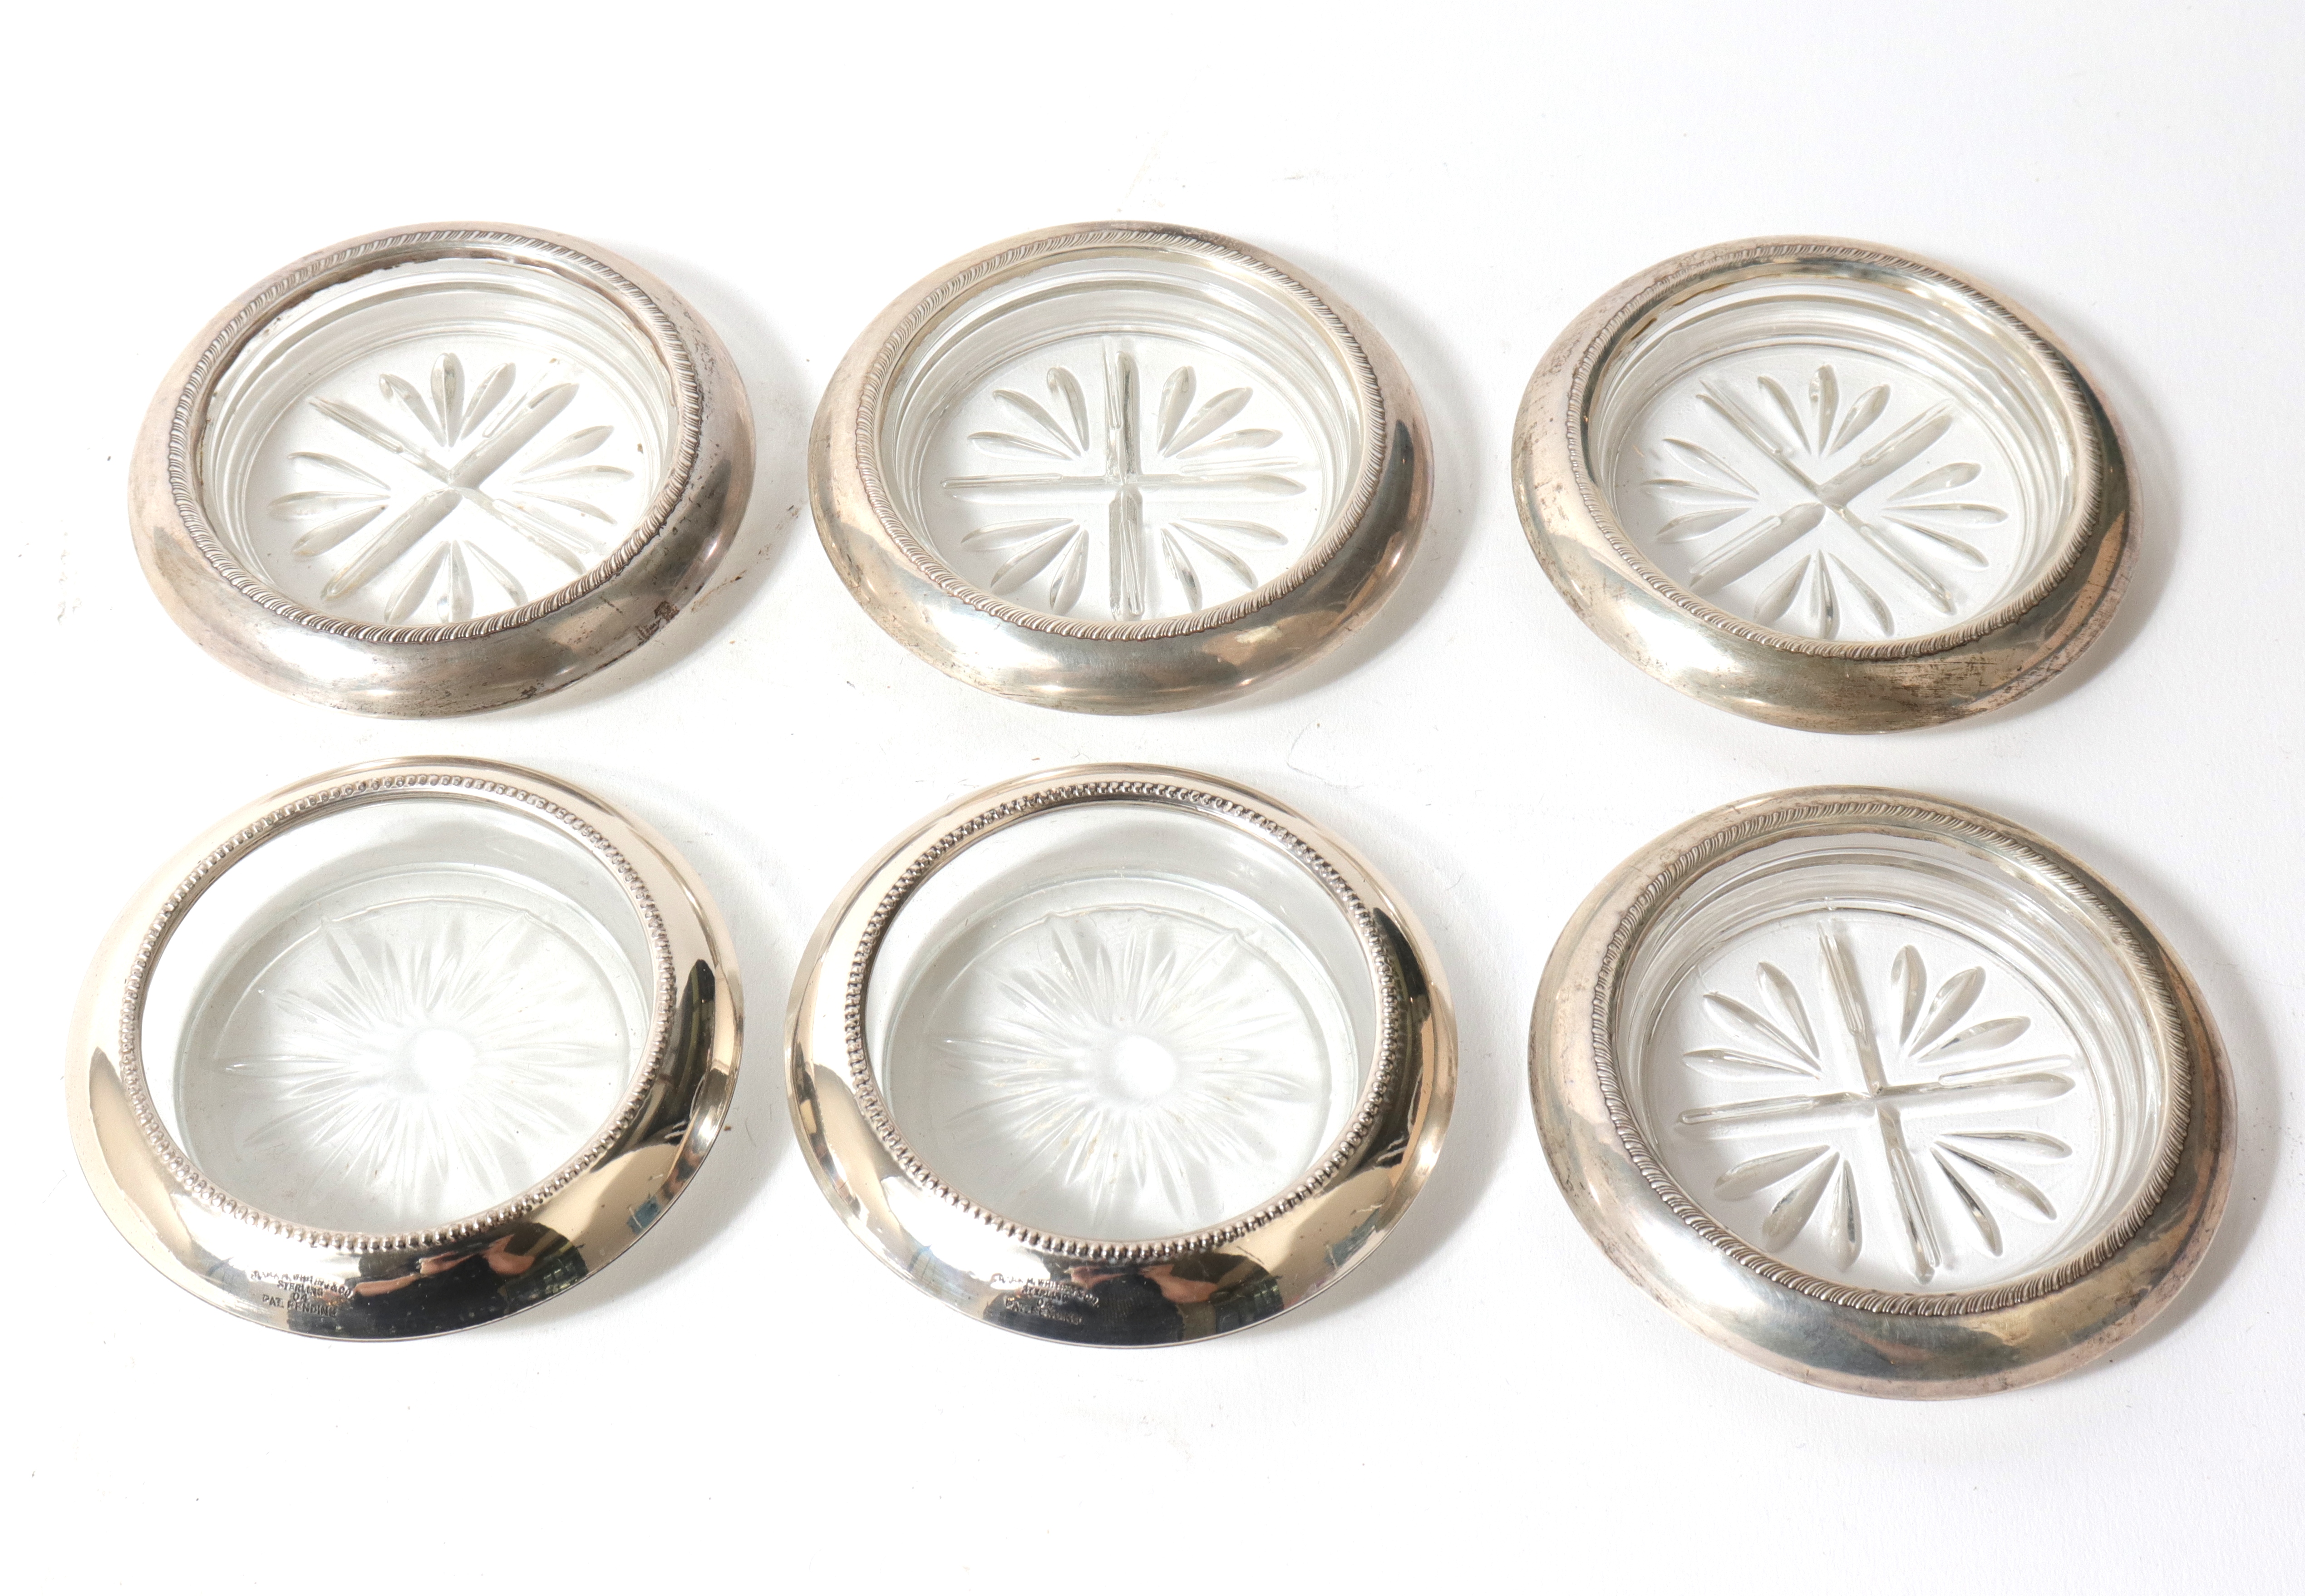 SILVER & GLASS COASTERS, SET OF